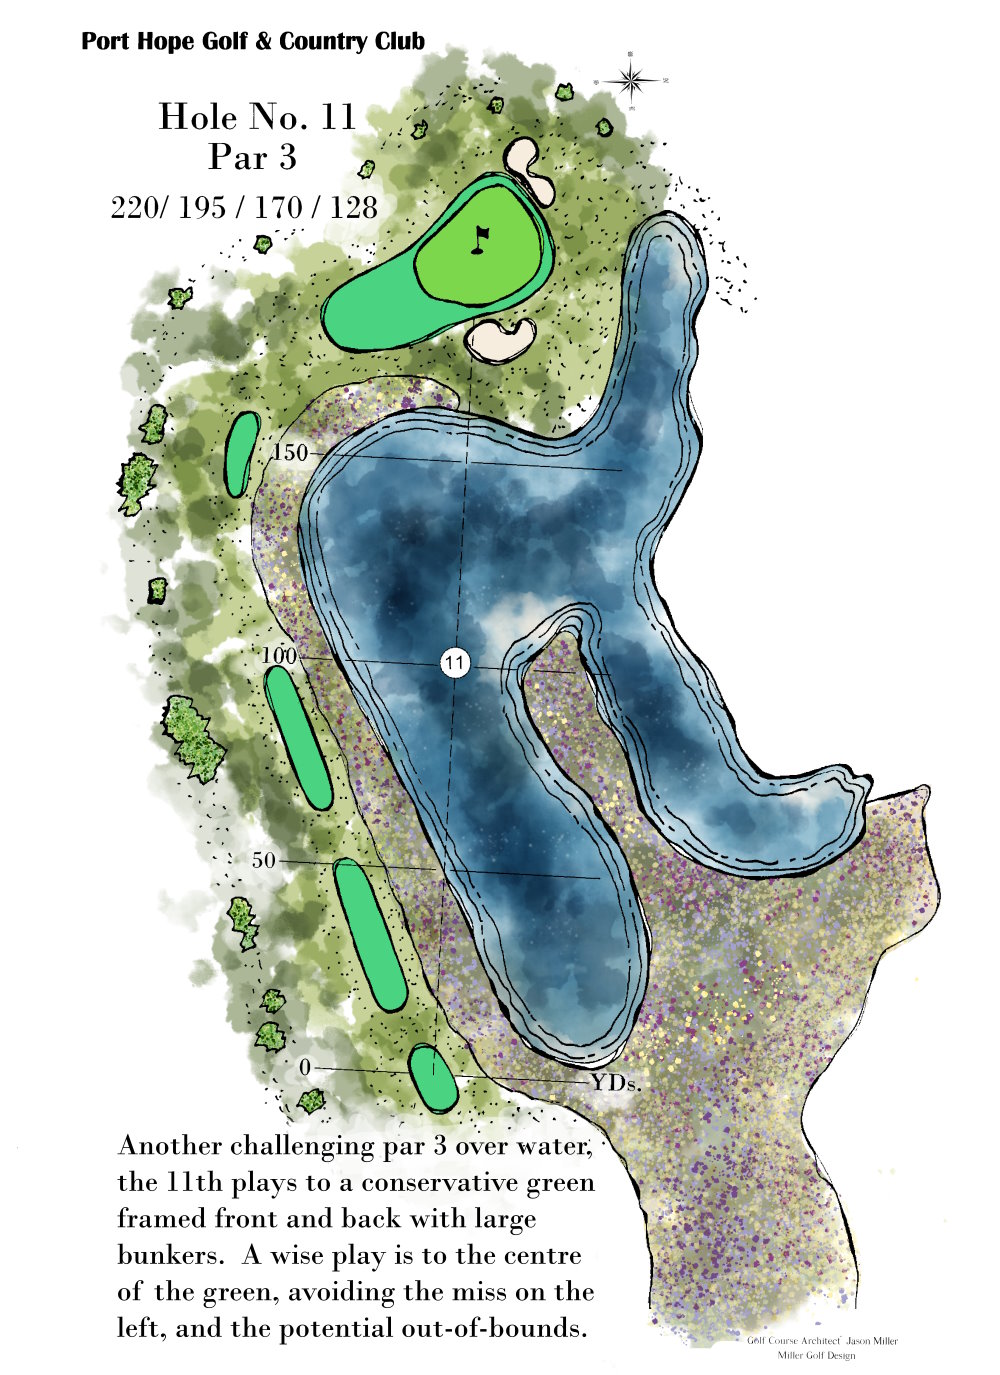 Rendering of Hole 11